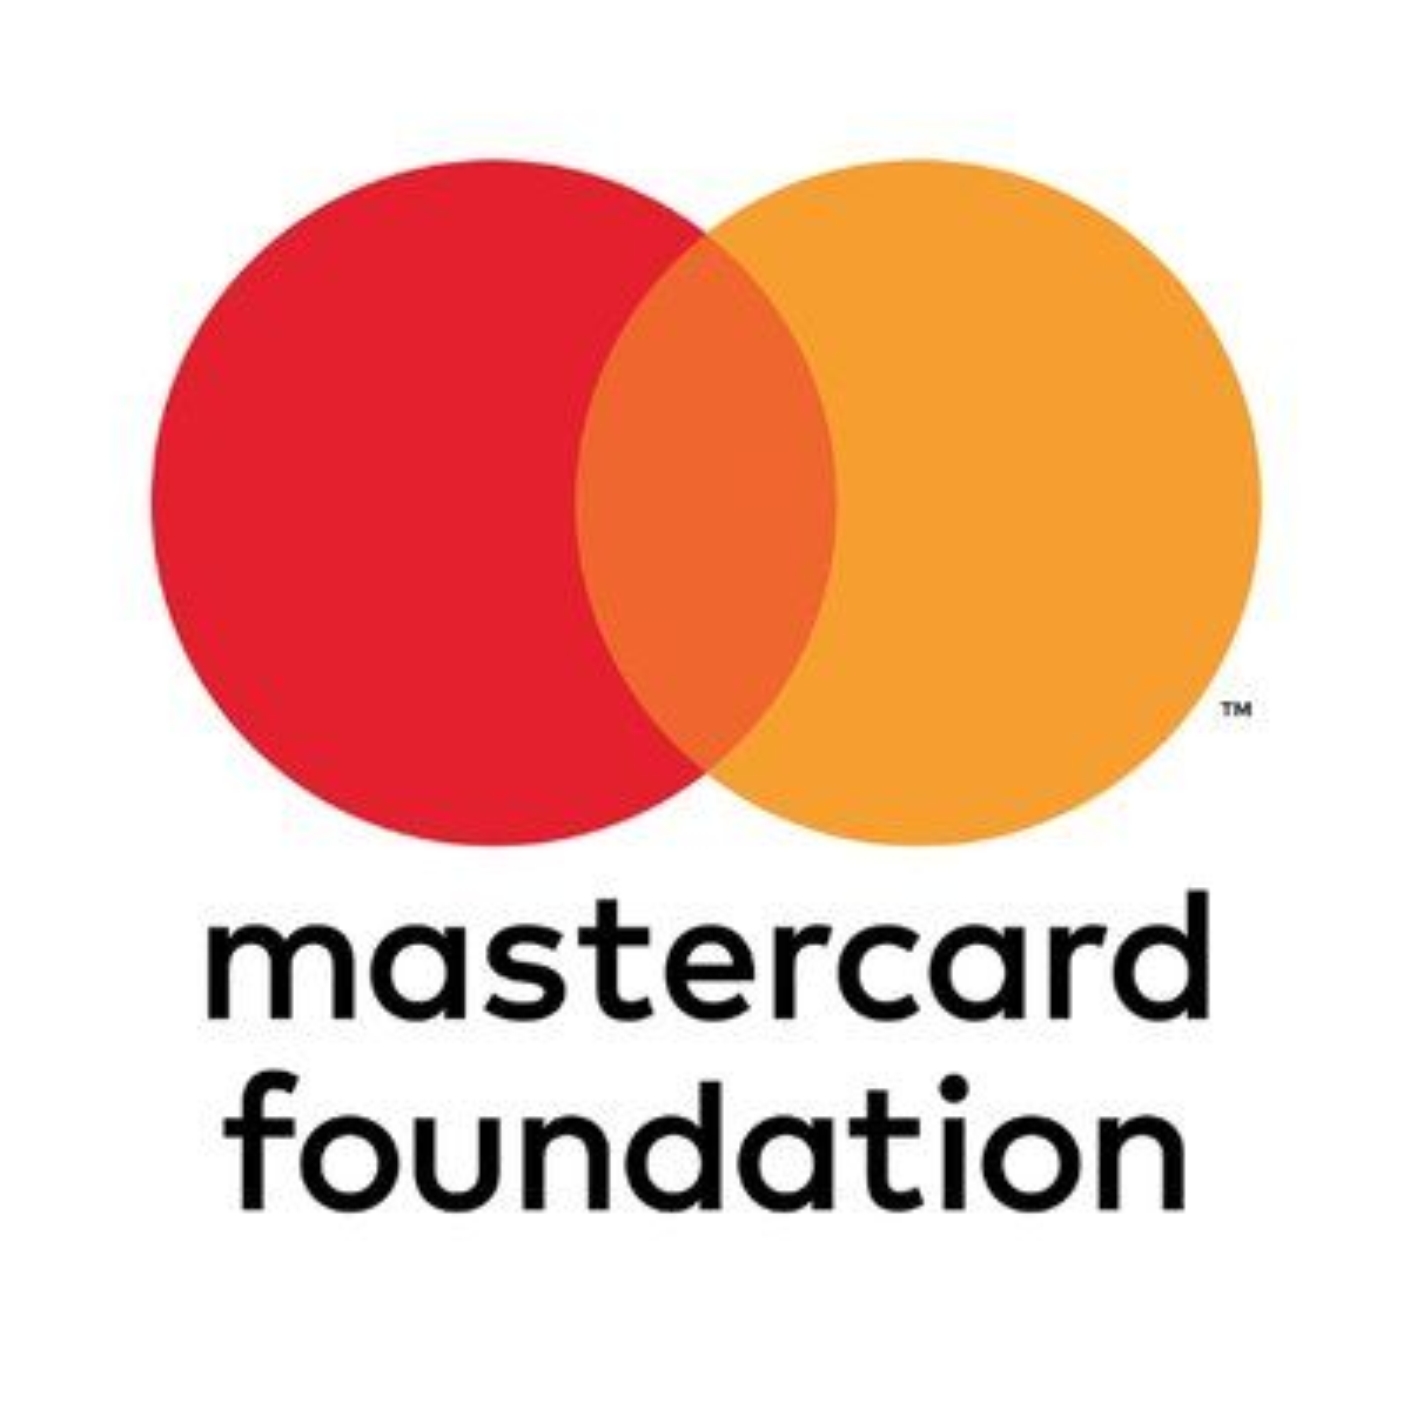 Mastercard Foundation Partners EDC, To Support 40,000 Youth With Learning And Resources-marketingspace.com.ng